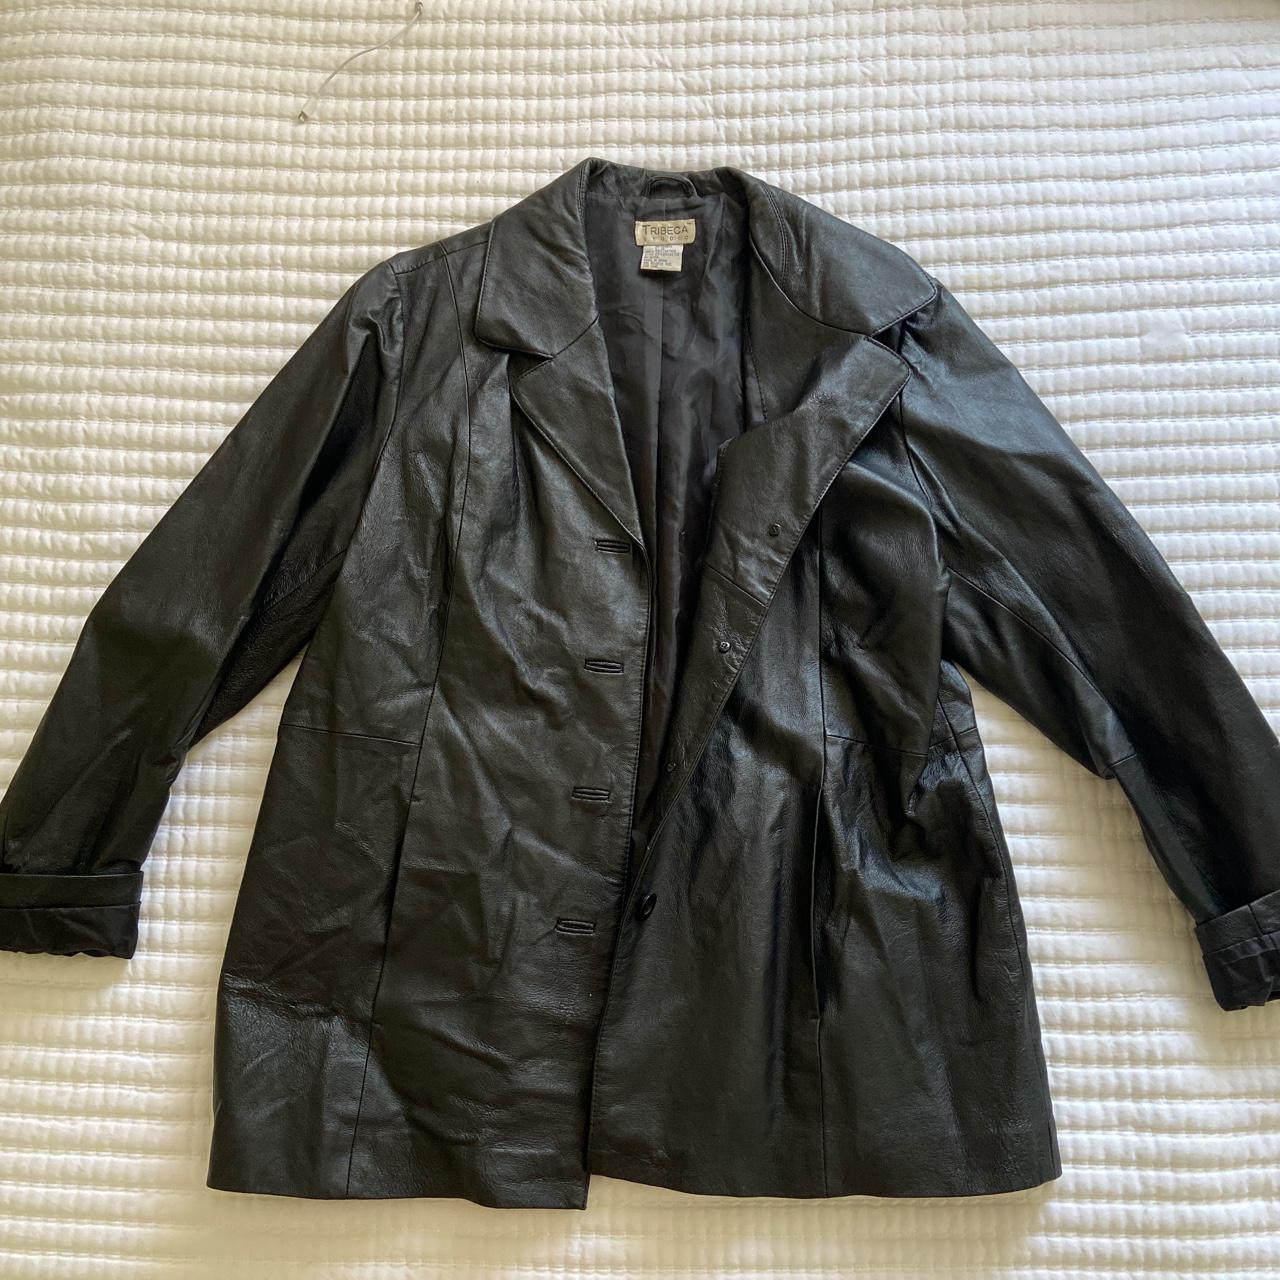 Leather black jacket in size xl. I’m usually a... - Depop